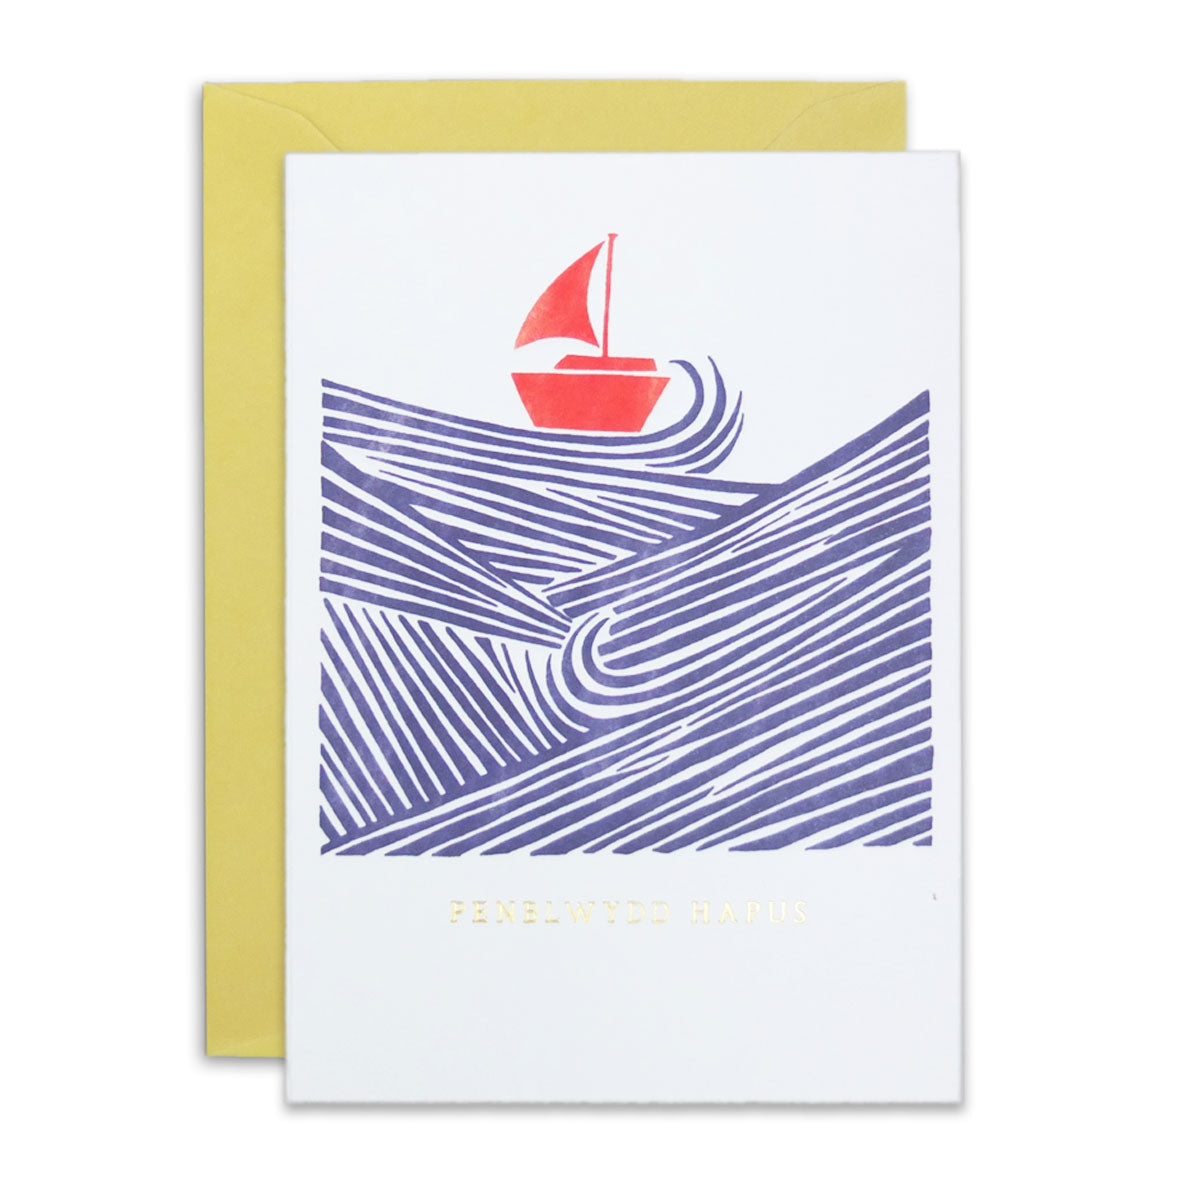 Embossed Penblwydd Hapus Boat and Waves Card